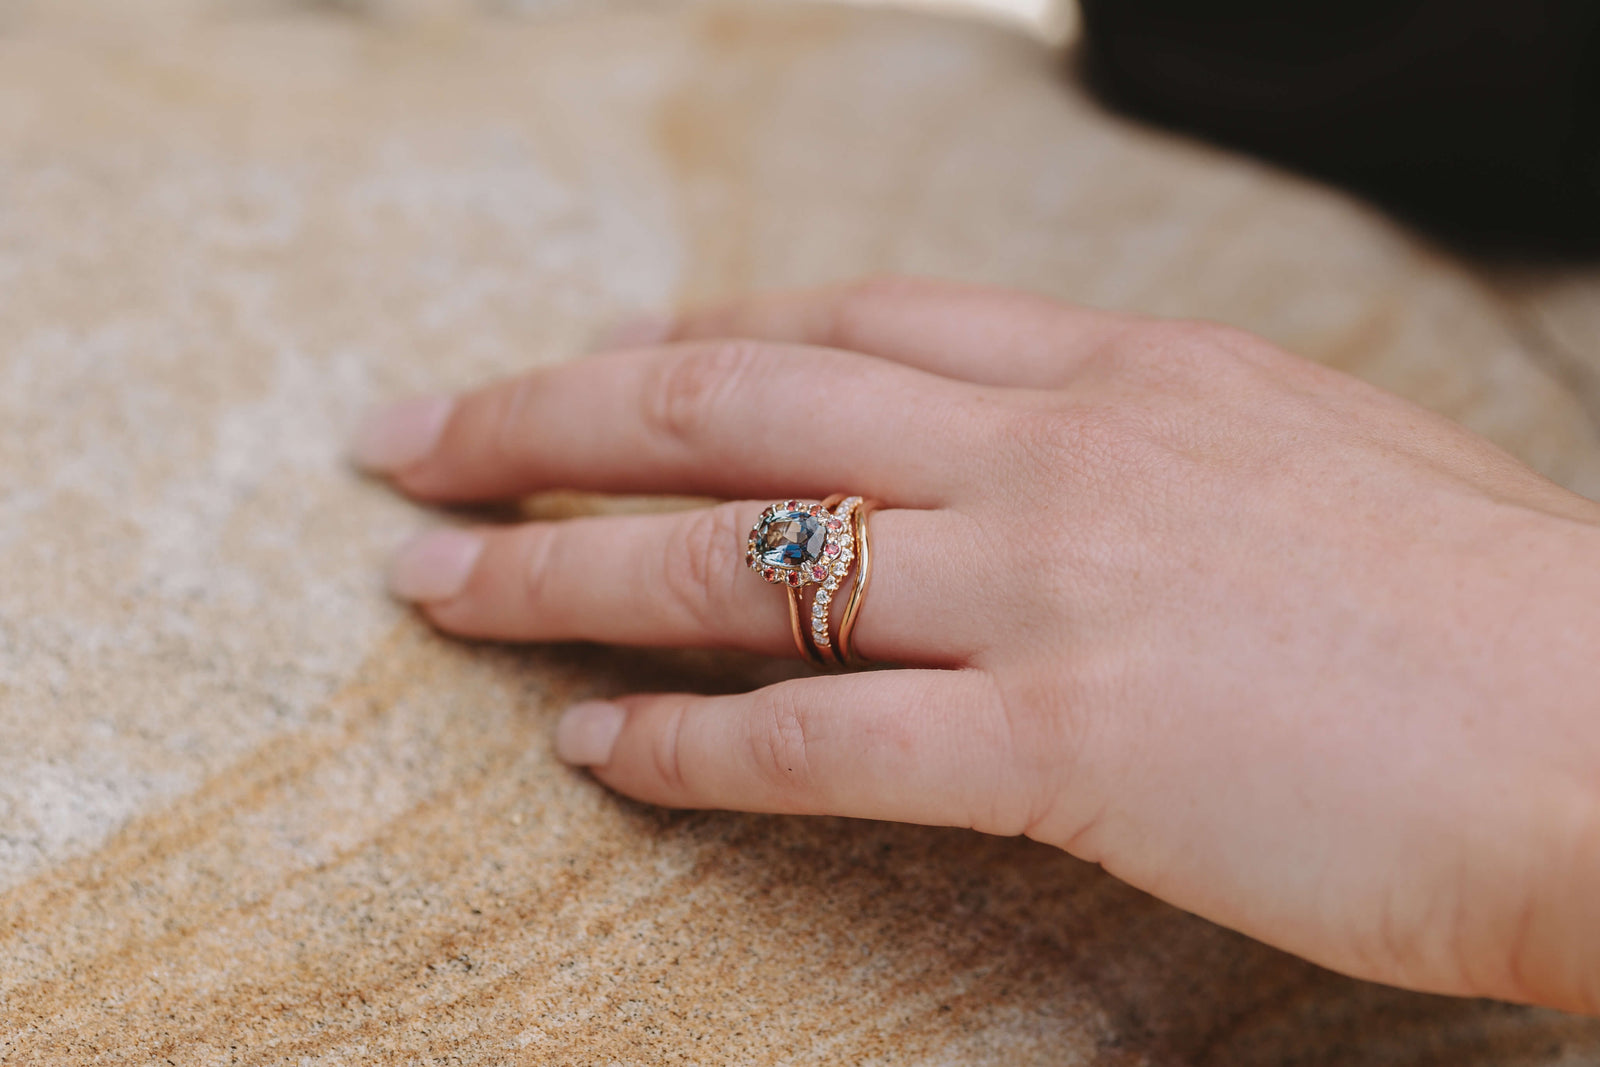 Should you choose a custom or ready-made engagement ring? We weigh in.